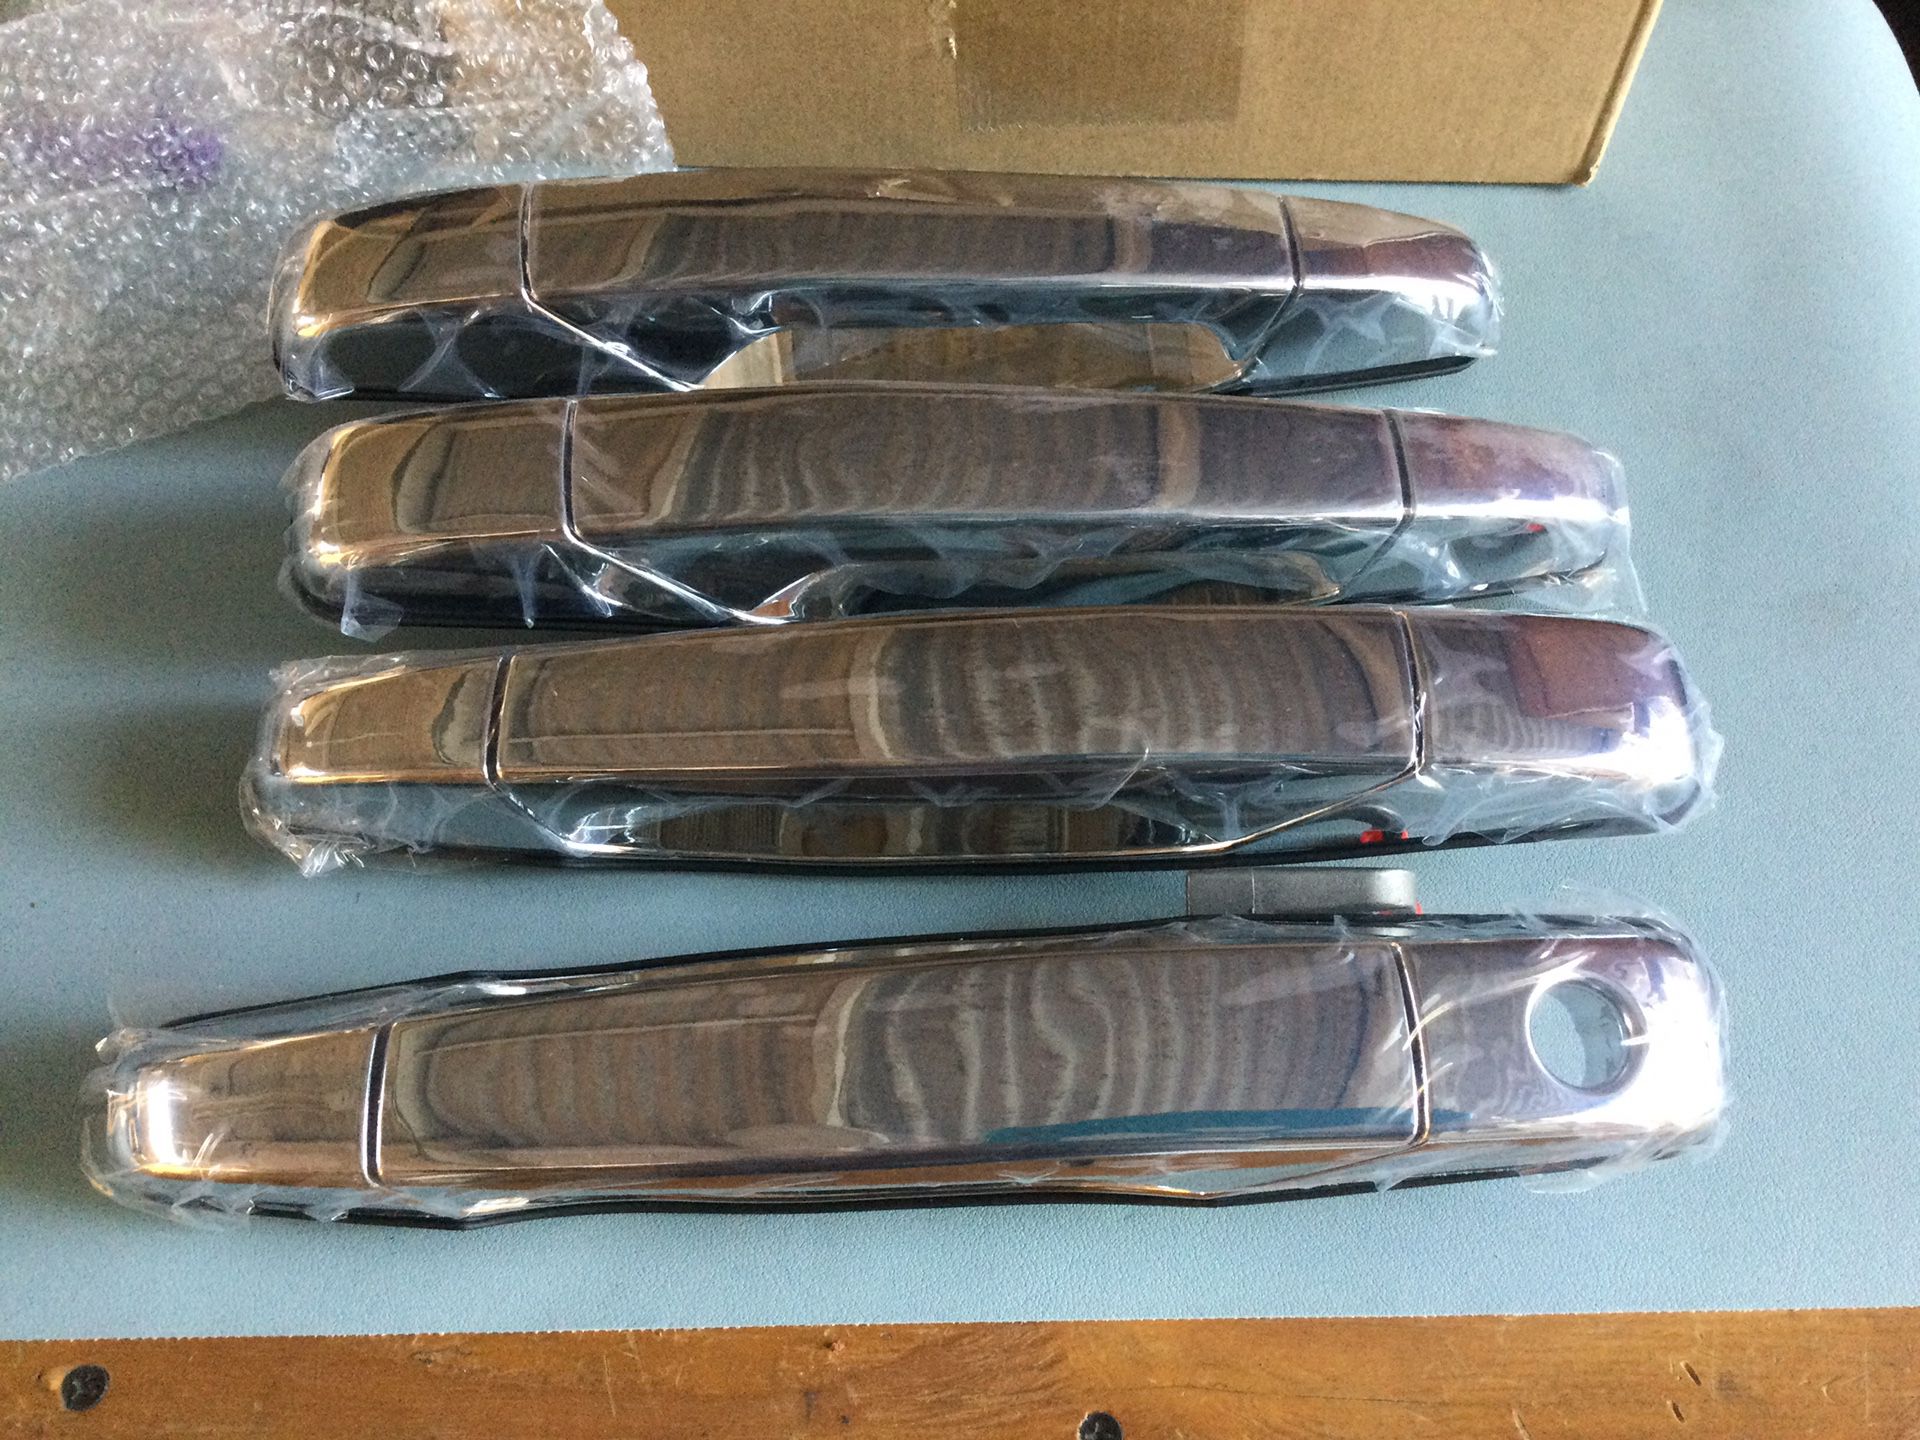 Set of 4 Chrome Outer Outside Exterior Door Handles for 07-13 Chevy Pickup Truck (see Pics Compatibility) $40.00 SOUTH GATE p. Up.